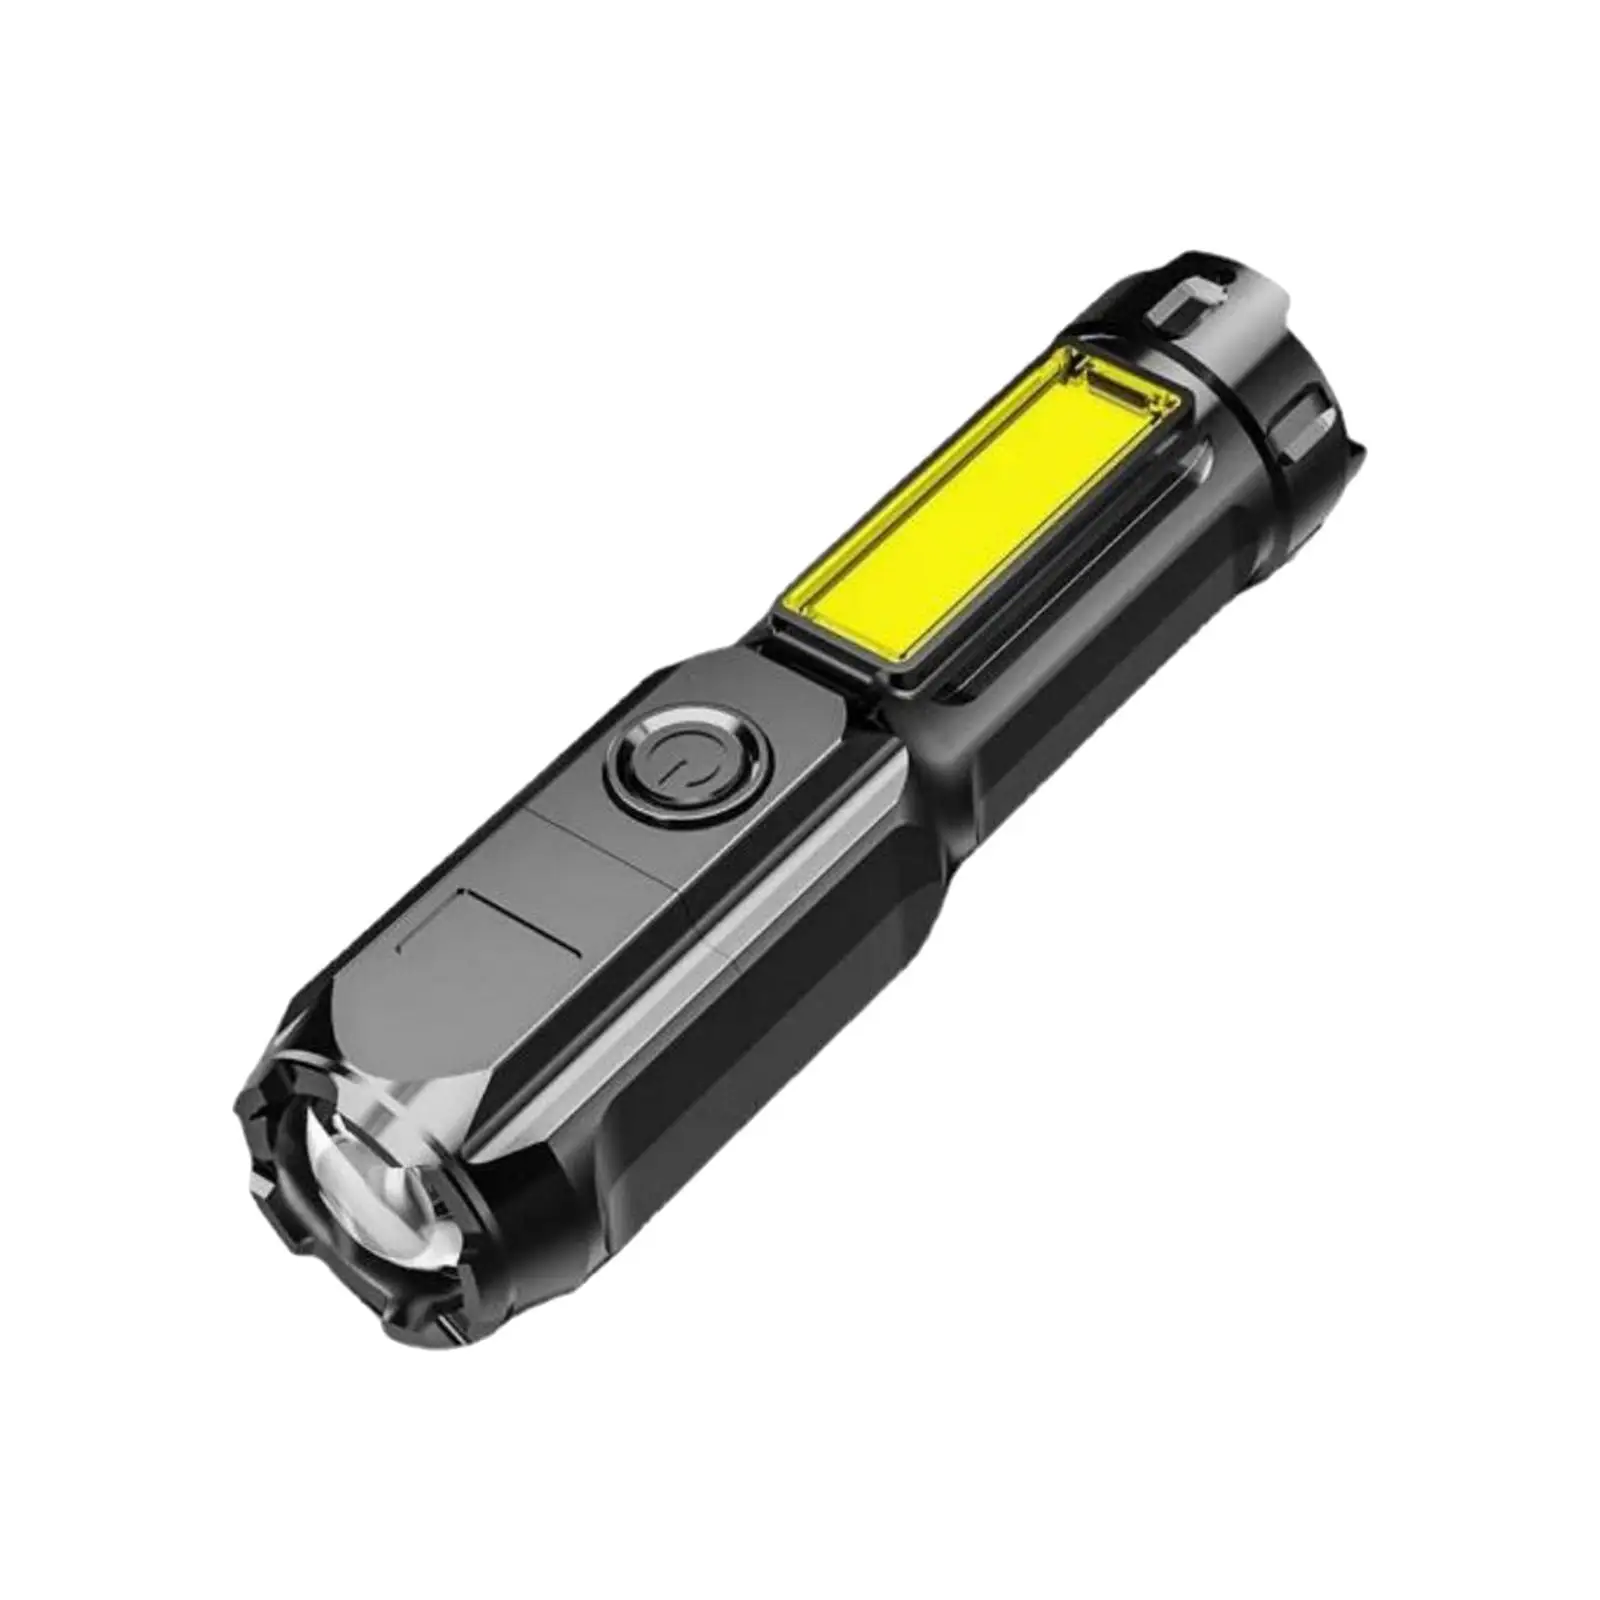 

LED flashlights Adjustable Brightness Super Bright with 4 Modes Mini Work Light for Tent Backpacking Camping Hiking Survival